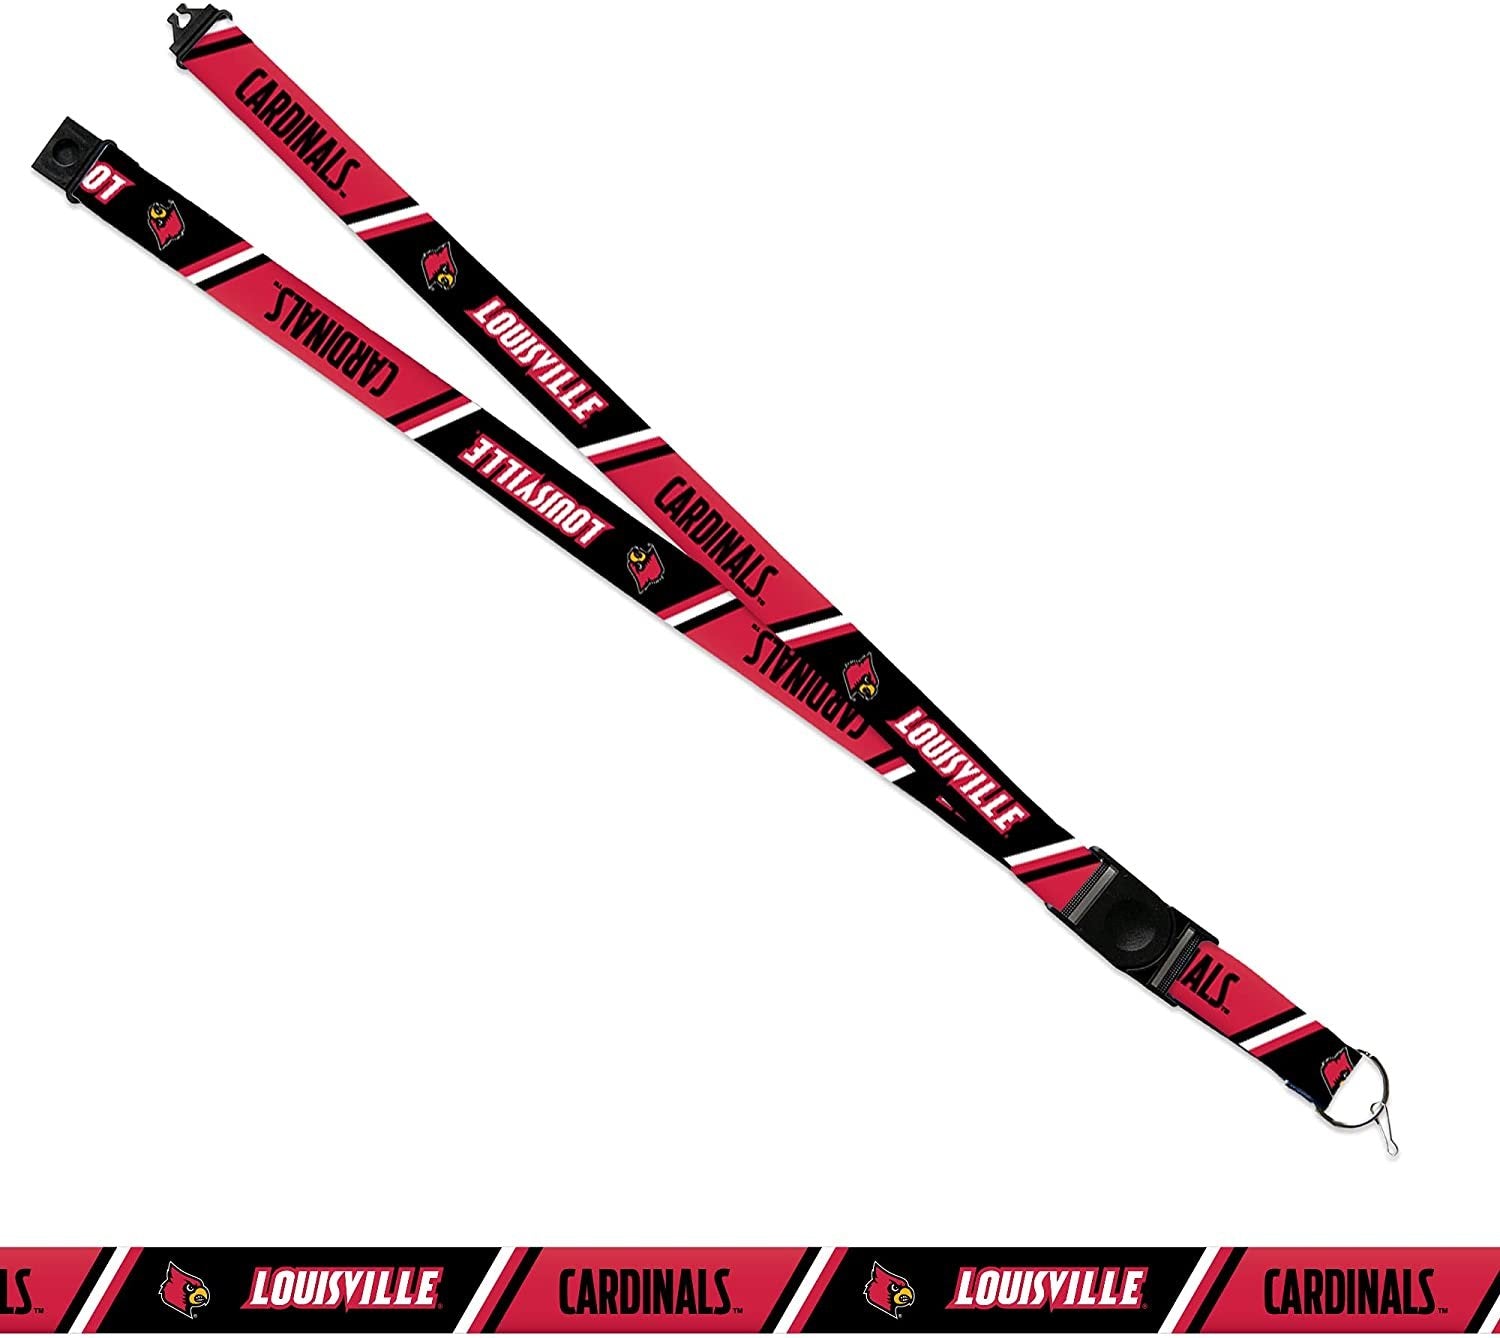 University of Louisville Cardinals Lanyard Keychain Double Sided 18 Inch Button Clip Safety Breakaway